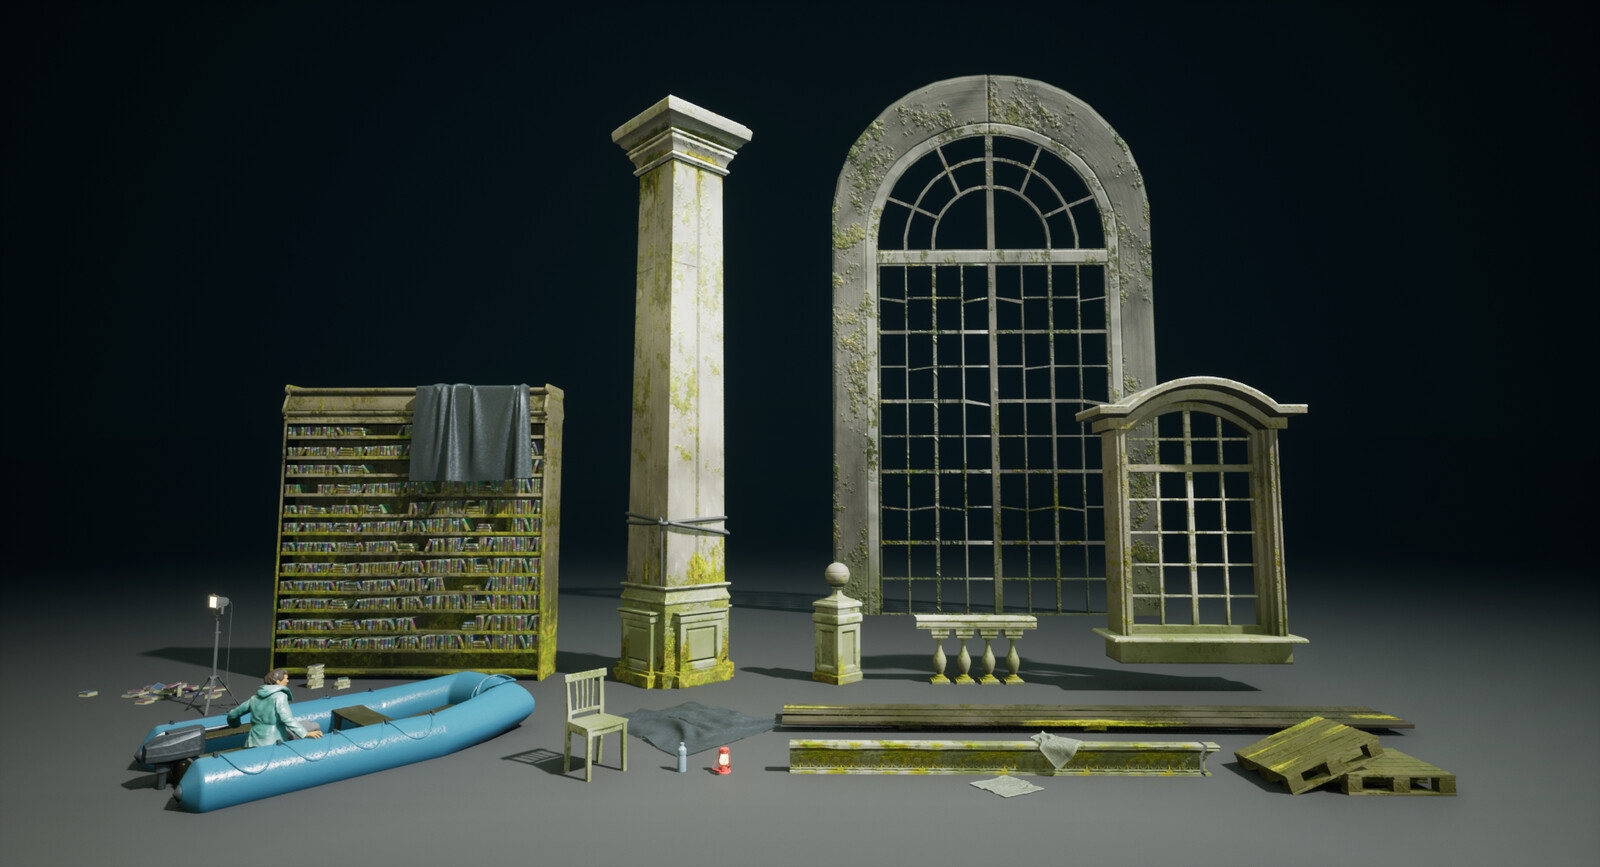 Some of the Assets making up the scene. The level itself consists of large building blocks.